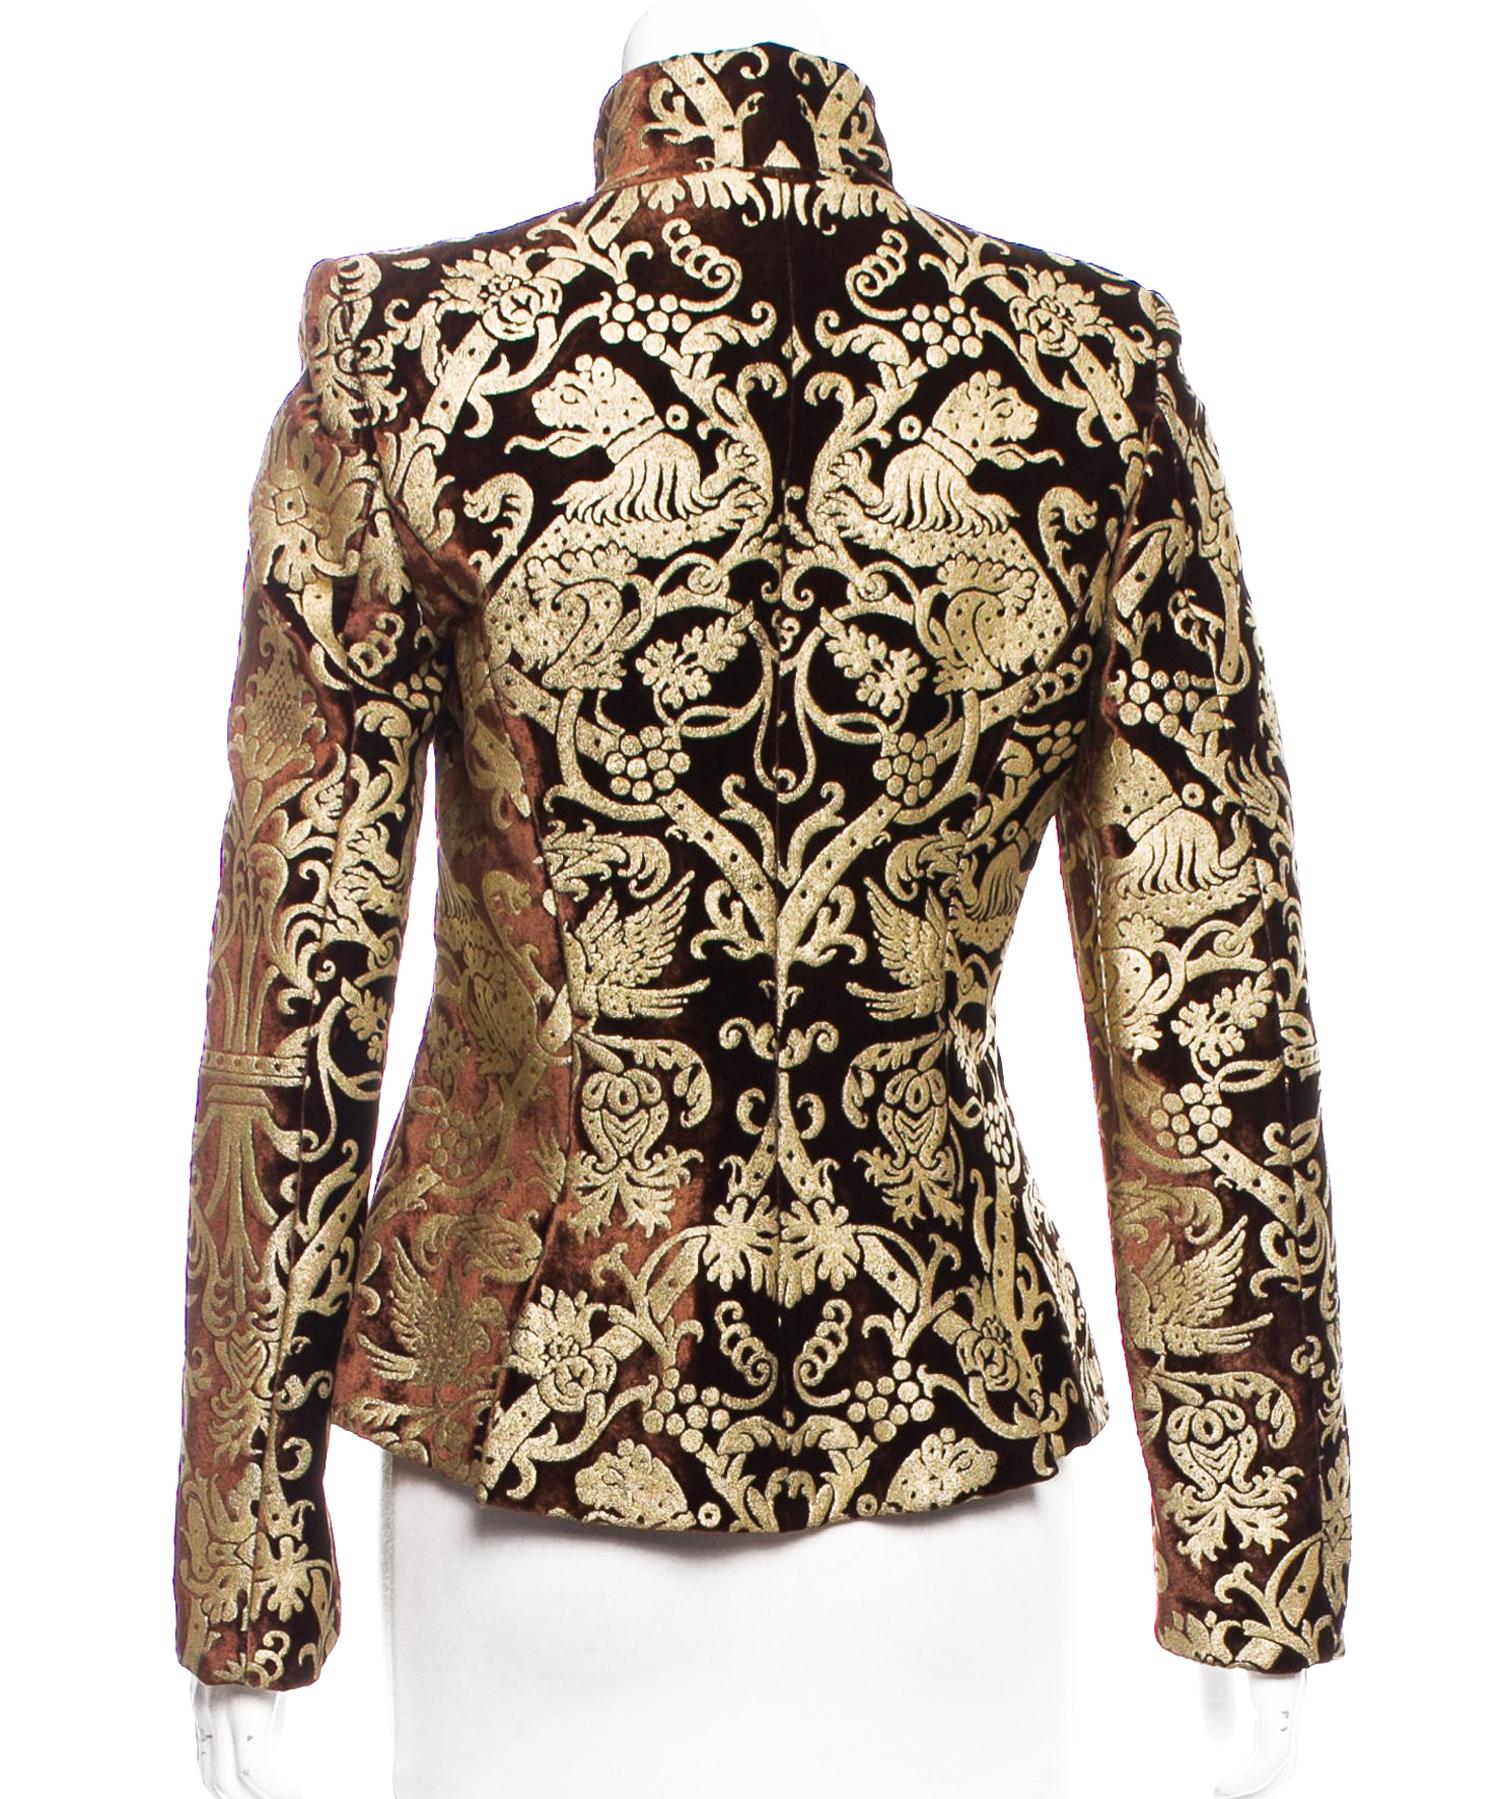 New Roberto Cavalli Brown Metallic Gold-Leafing Velvet Evening Blazer
F/W 2006 Collection
Designer sizes available 42 and 44 - US 6 and 8
Unique Cavalli Metallic Gold-Leafing Design over the Brown Velvet, Designed by 2 ways for Closing at Front,